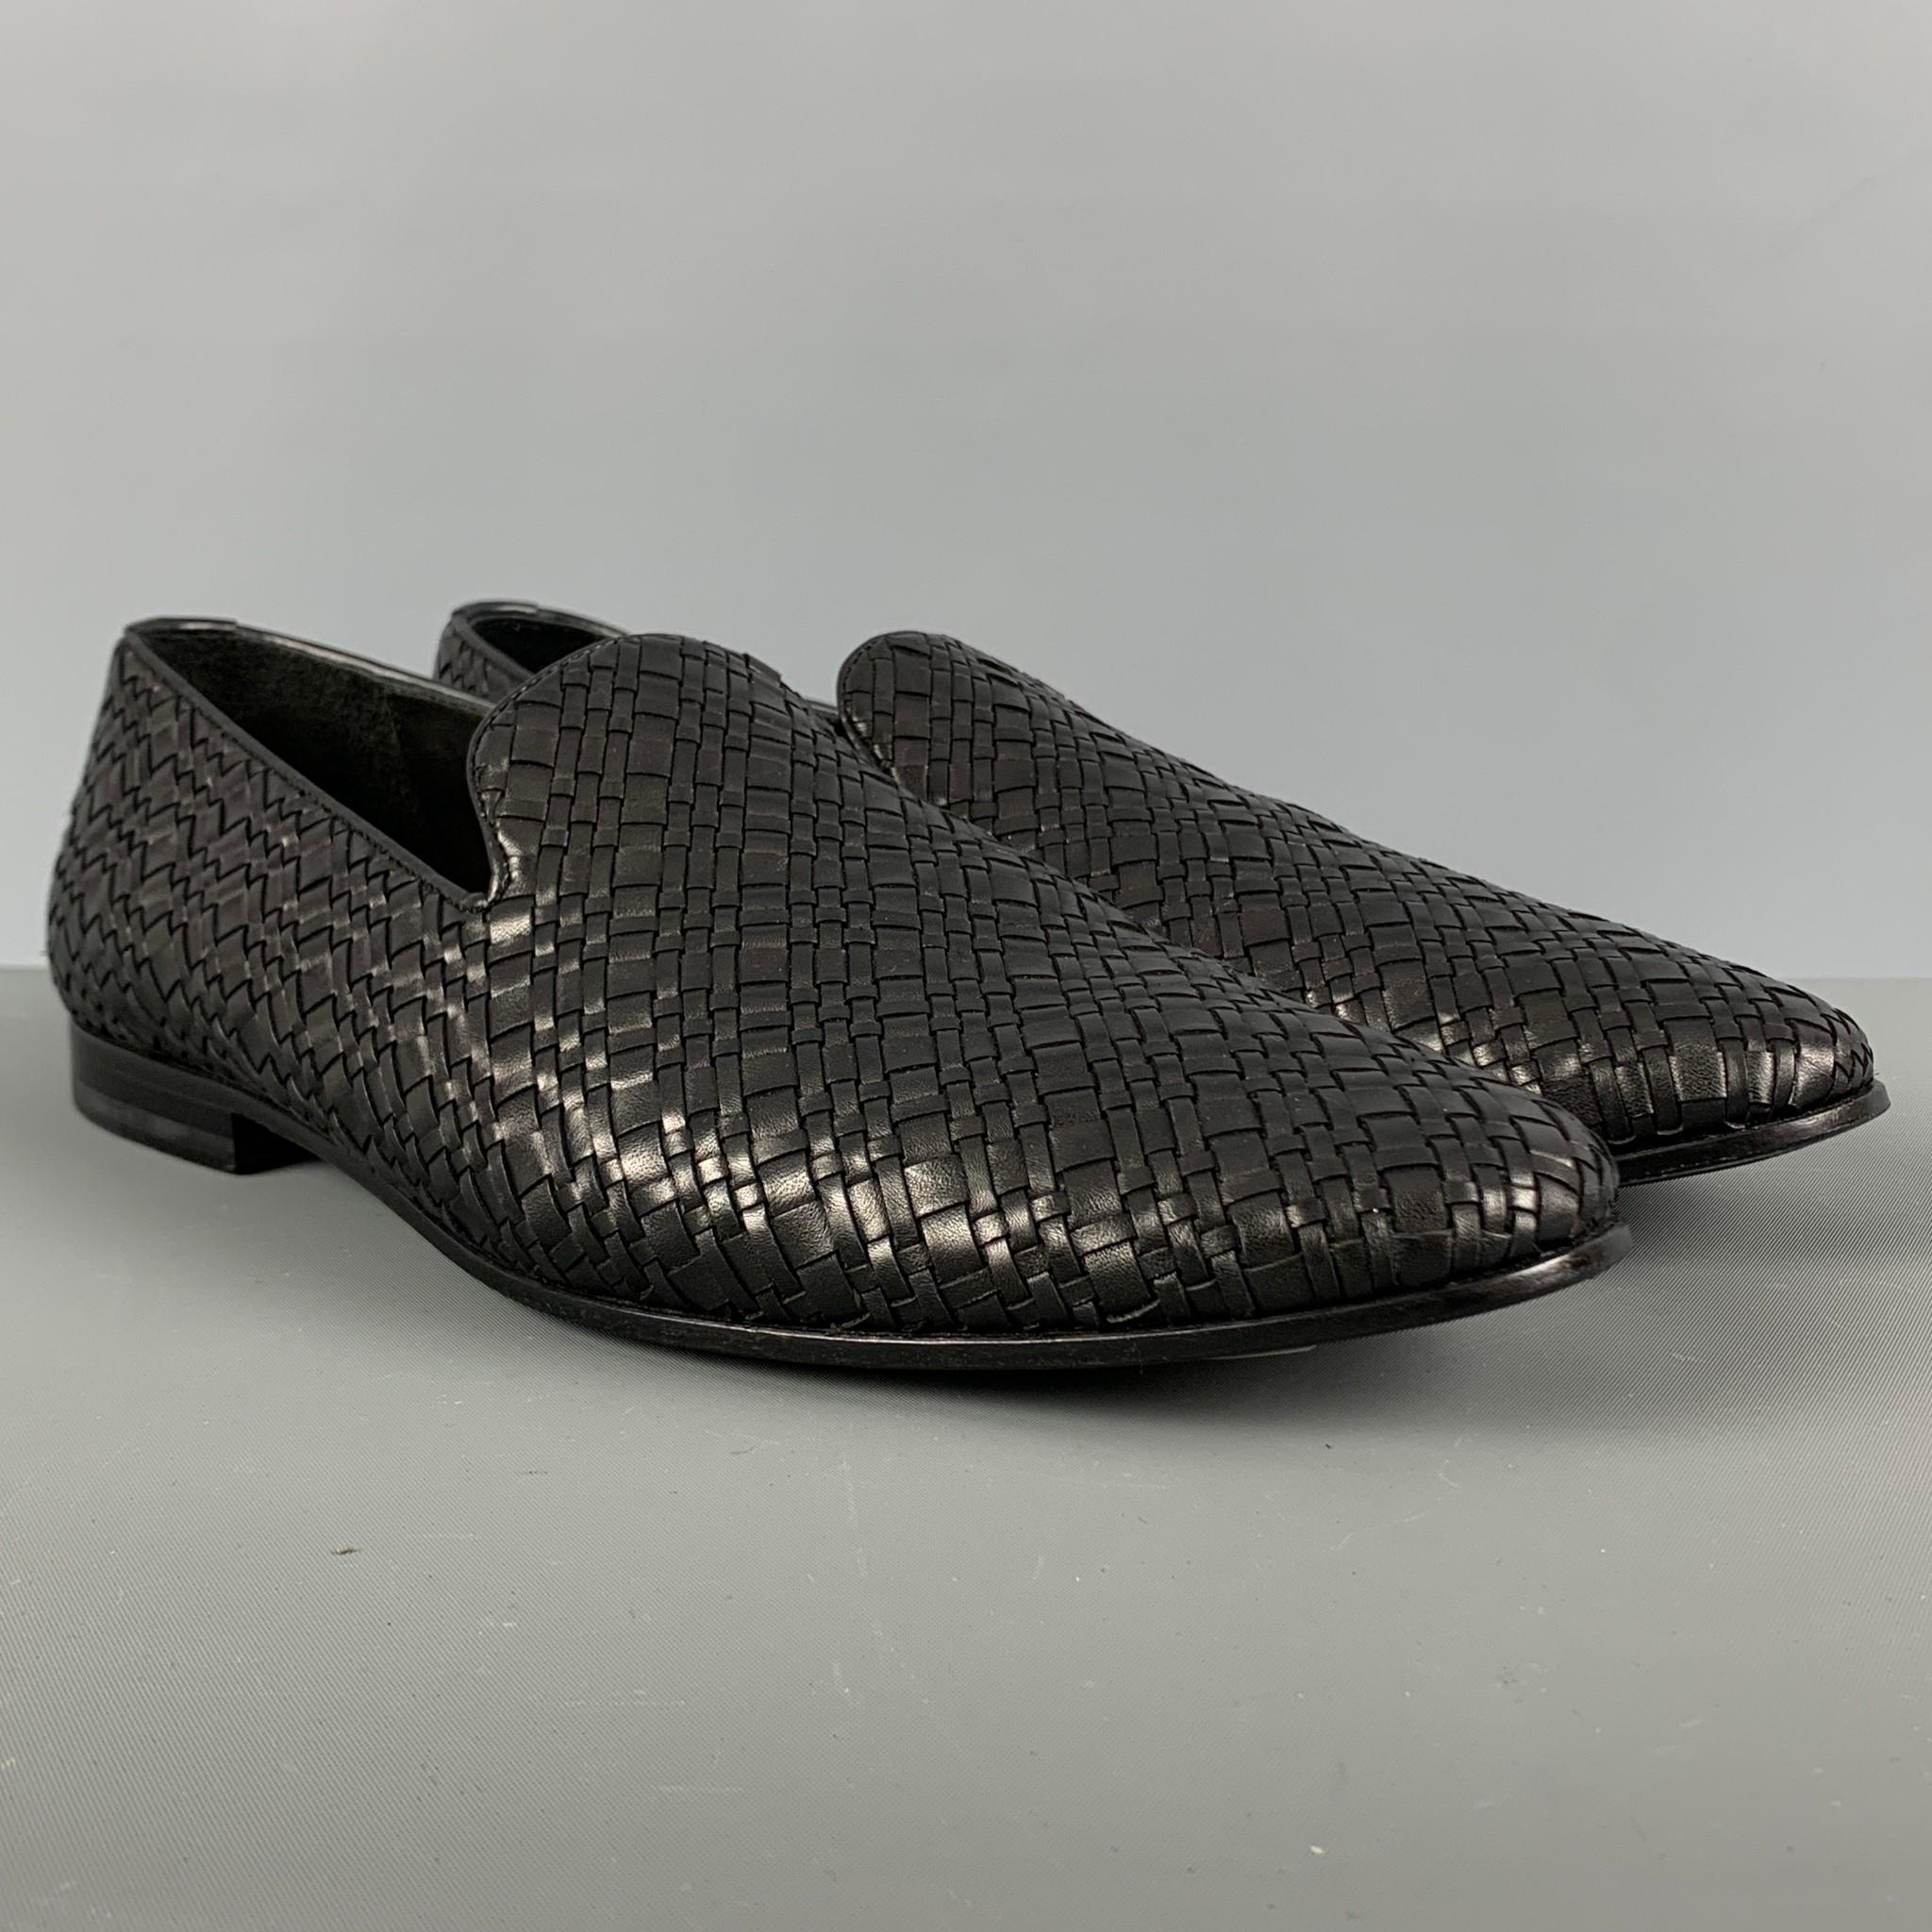 BOTTEGA VENETA loafers comes in a black basket weave leather featuring a slipper style.

Very Good Pre-Owned Condition. Minor signs of wear.
Marked: 42

Outsole: 11.75 in. x 3.75 in.    

SKU: 124991
Category: Loafers

More Details
Brand: BOTTEGA